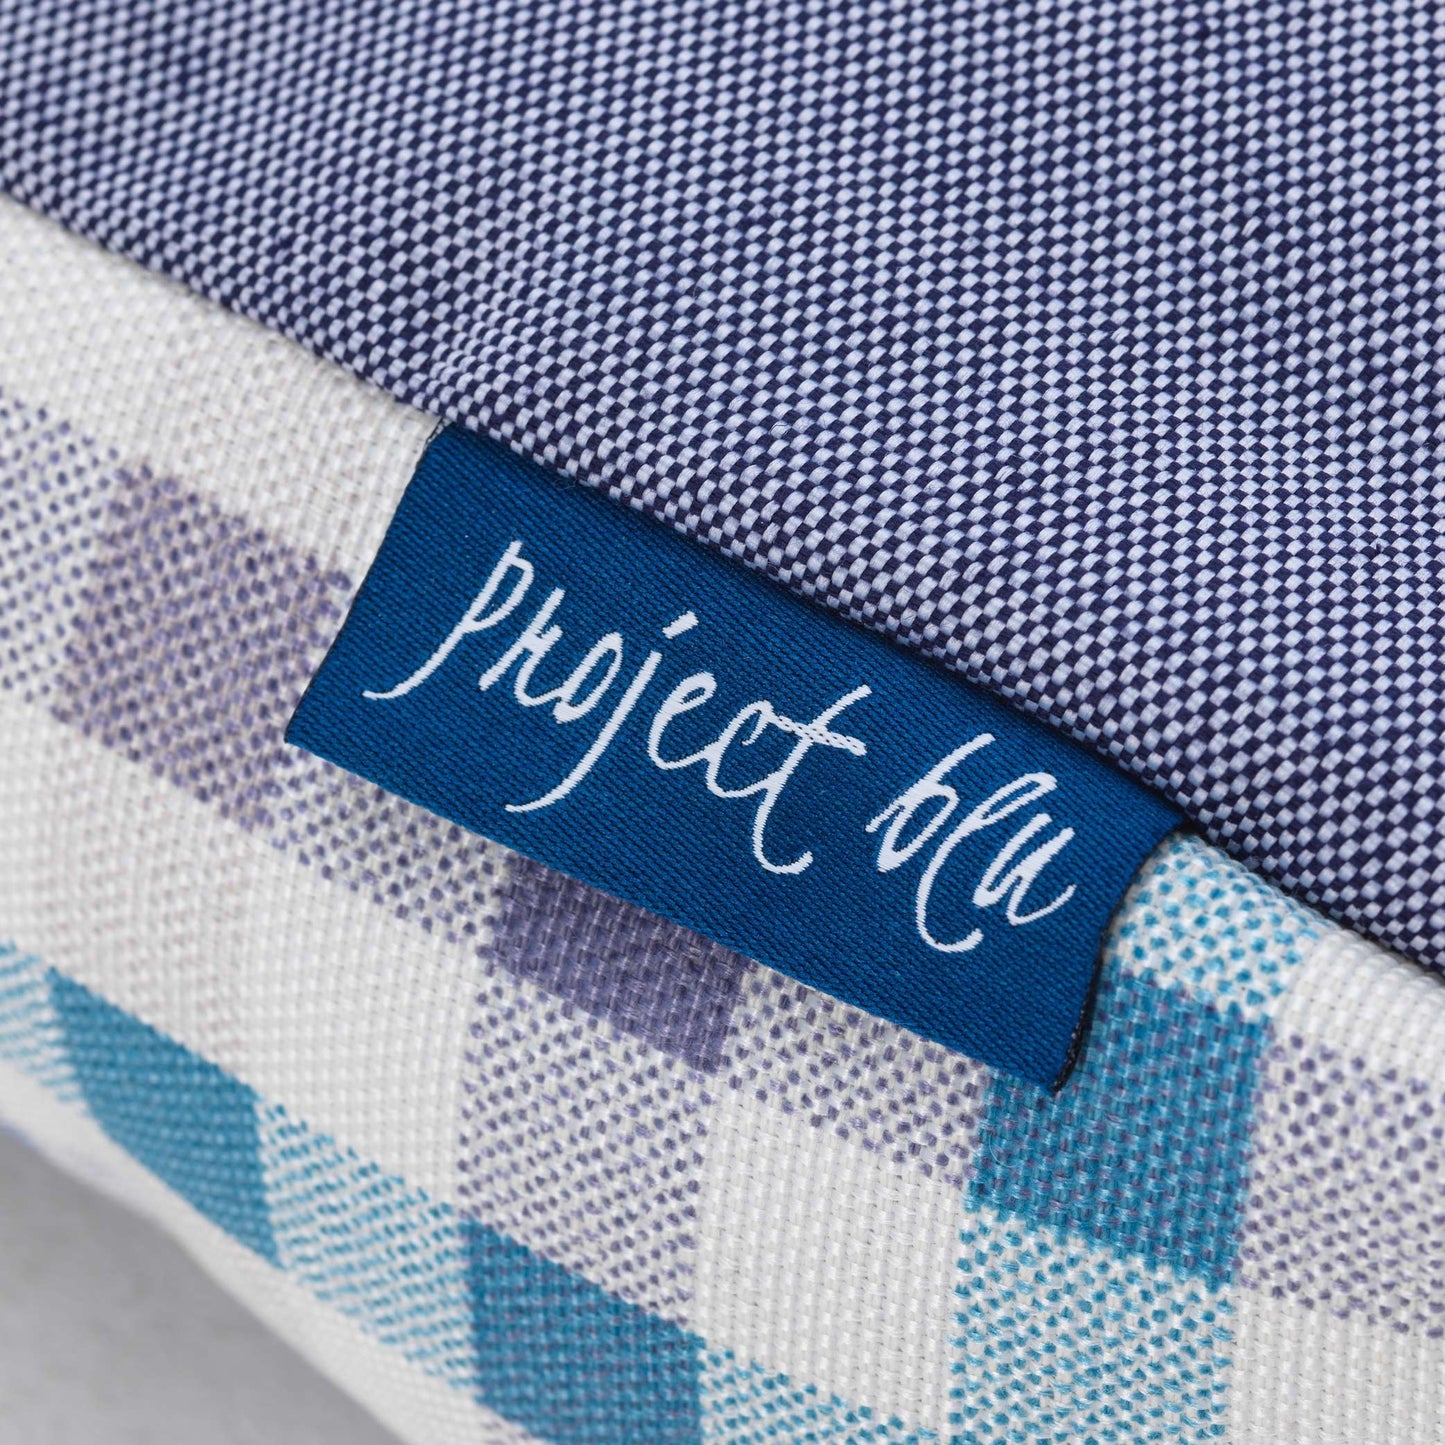 Project Blu tag on Bengal Dog Bed Mattress